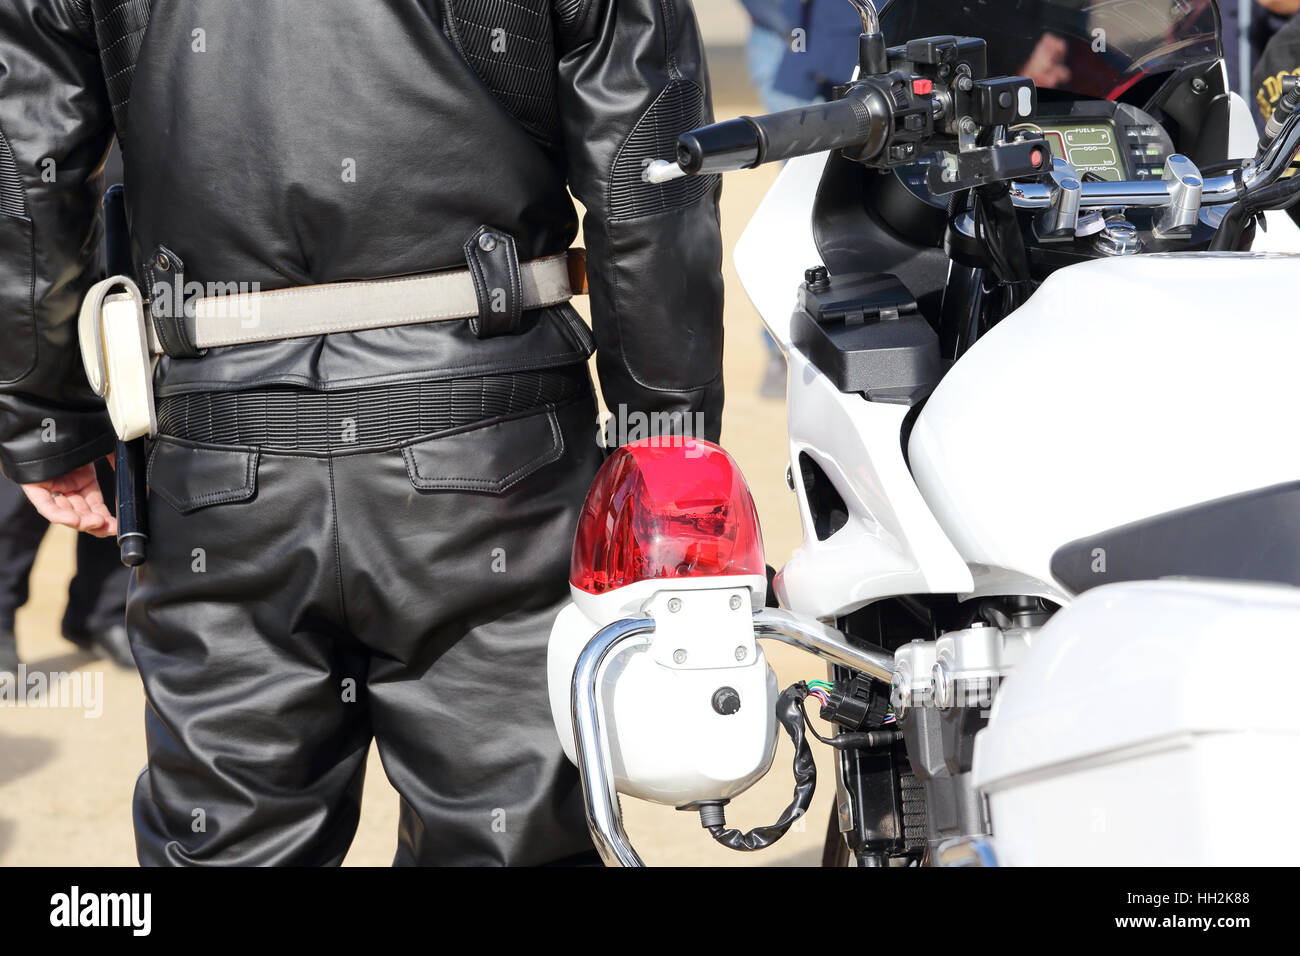 Back view of Japanese police motorcycle Stock Photo